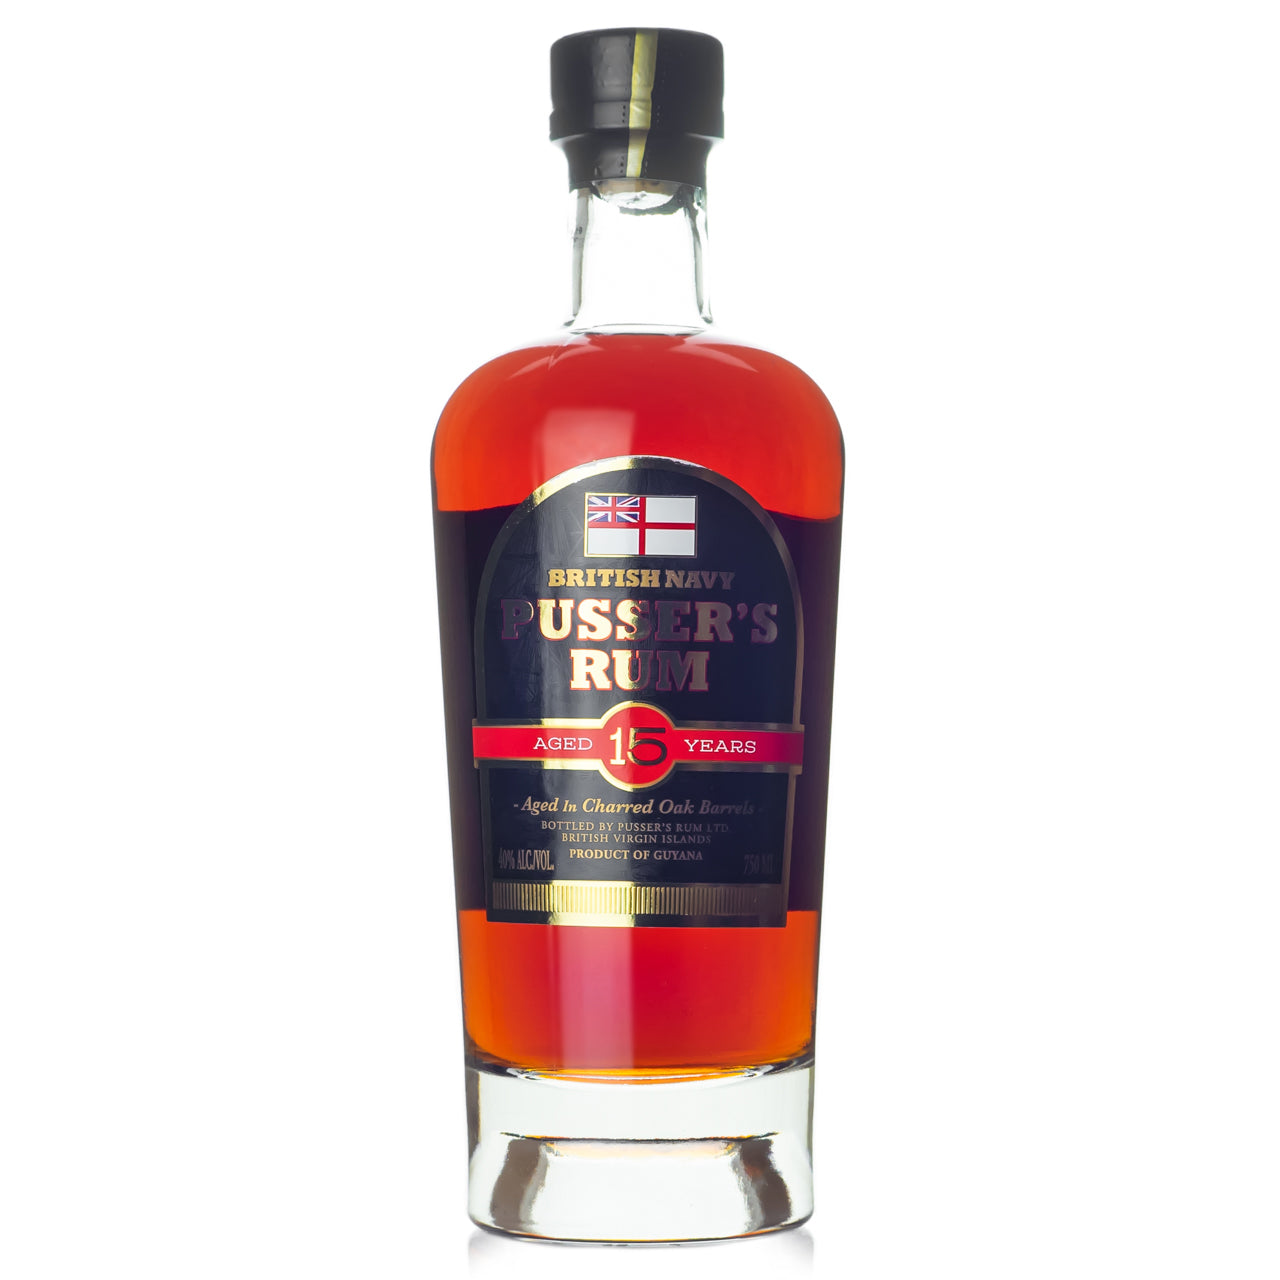 Pussers 15 Year True Aged Rum